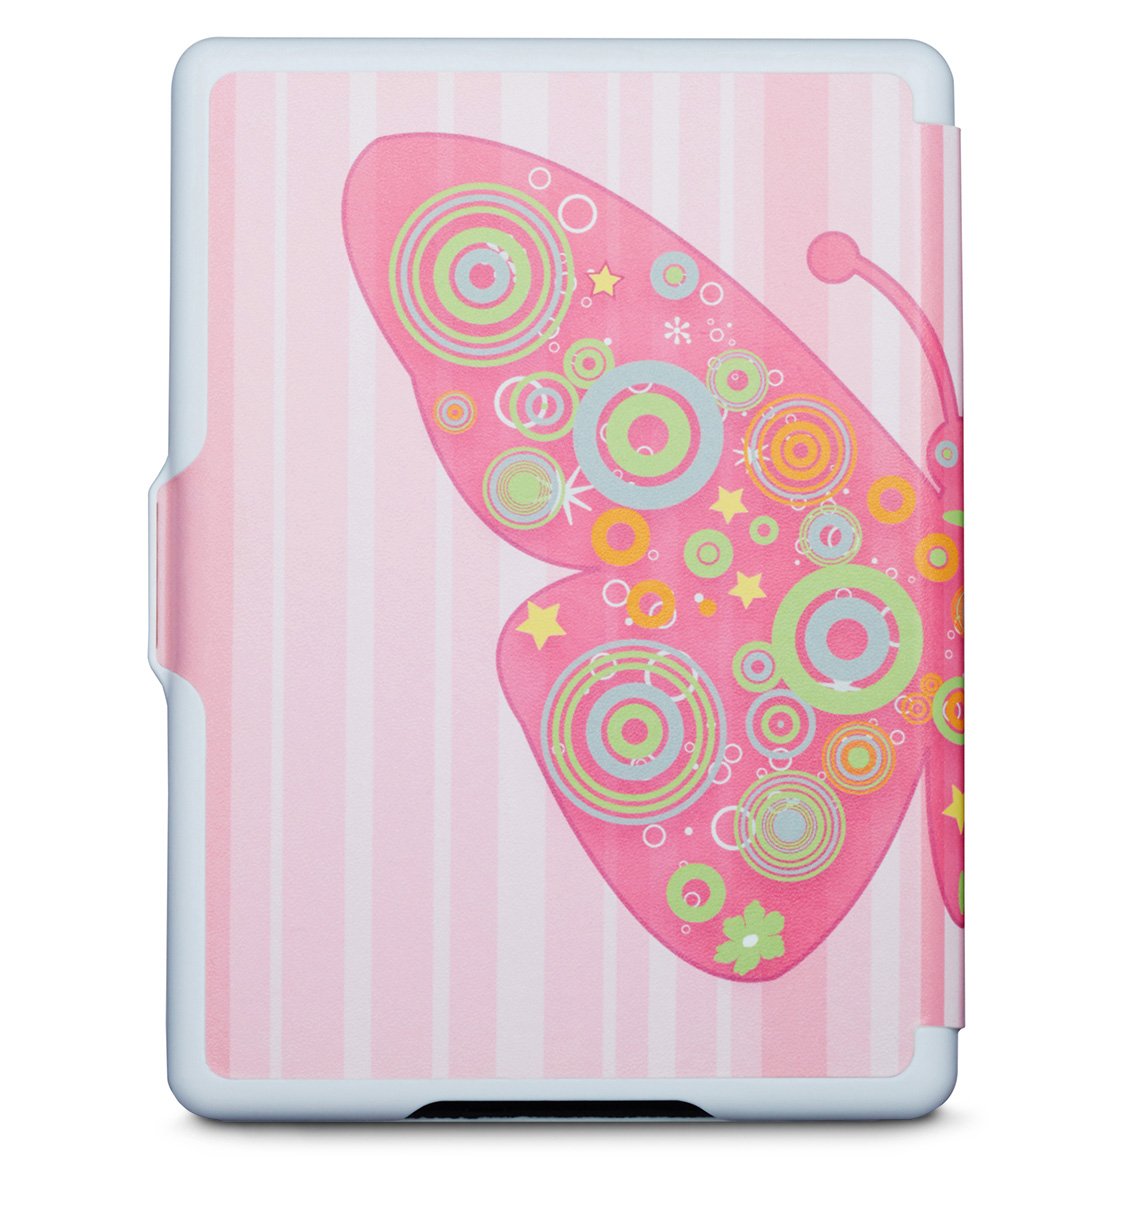 Nupro Kindle Case - Butterfly (8th Generation - will not fit Paperwhite, Oasis or any other generation of Kindles)